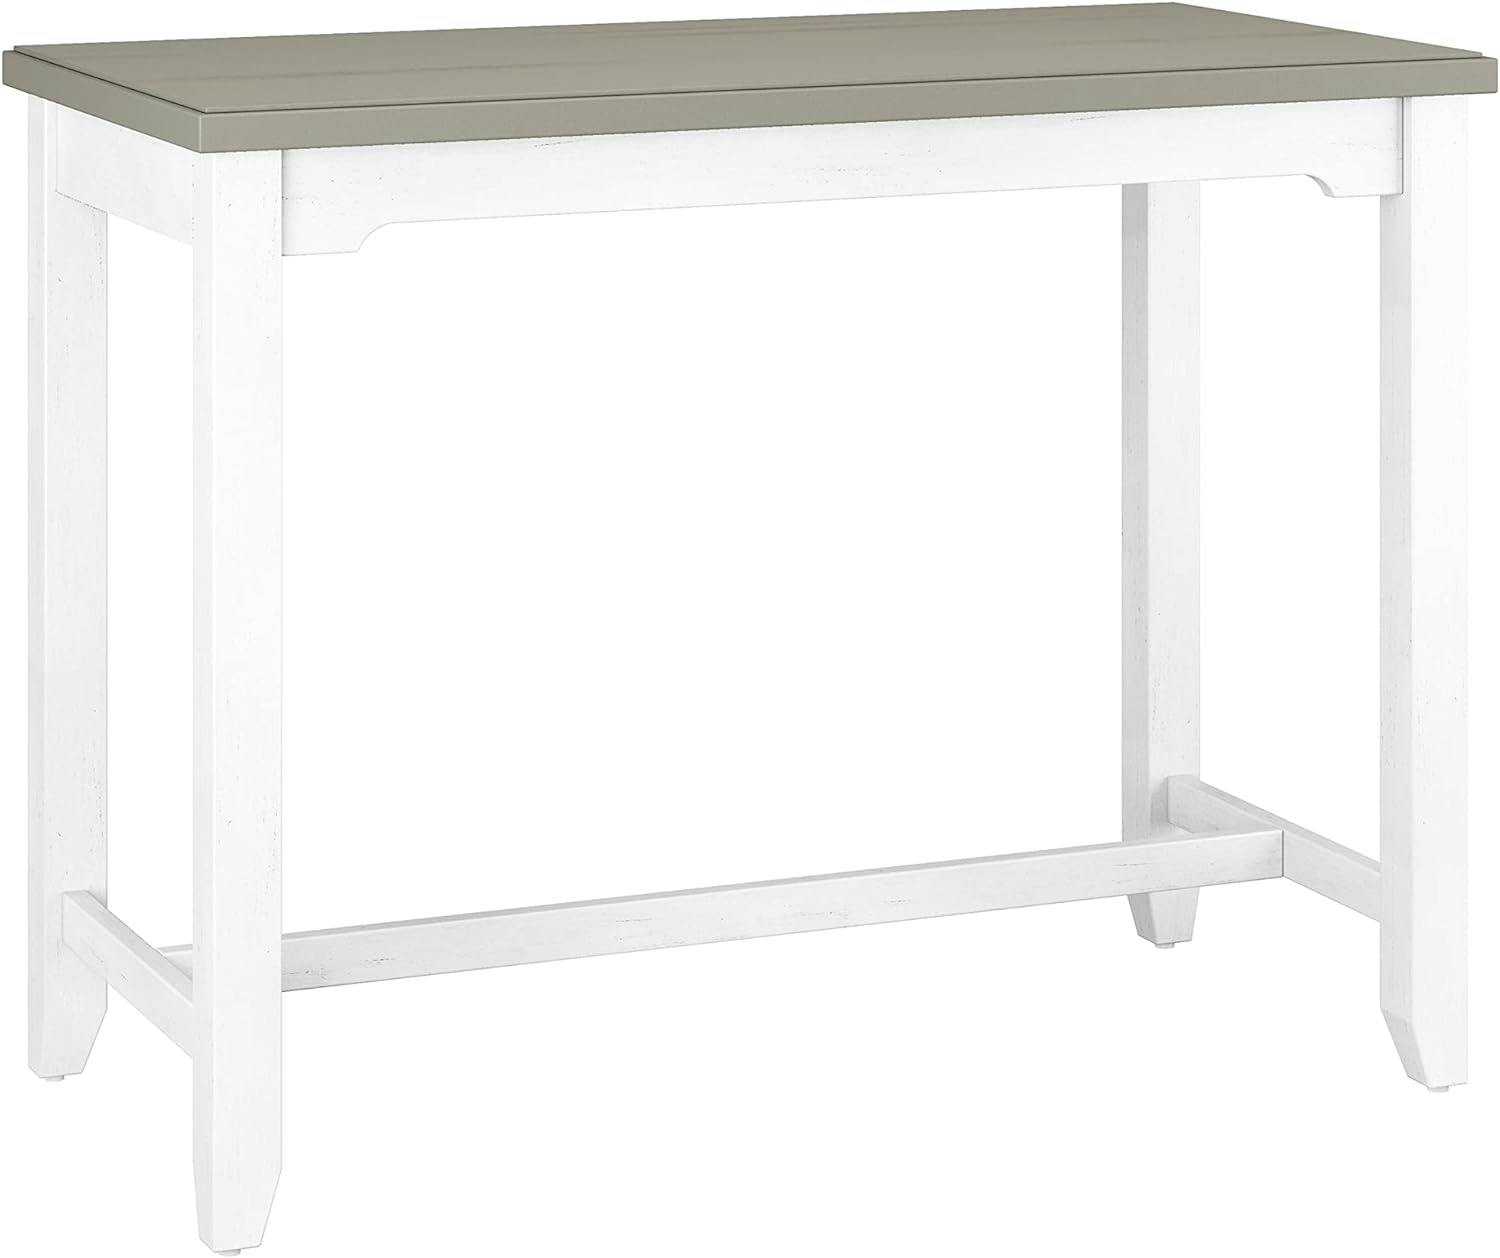 Modern Farmhouse Rectangular Counter Height Table in Distressed Gray and Sea White